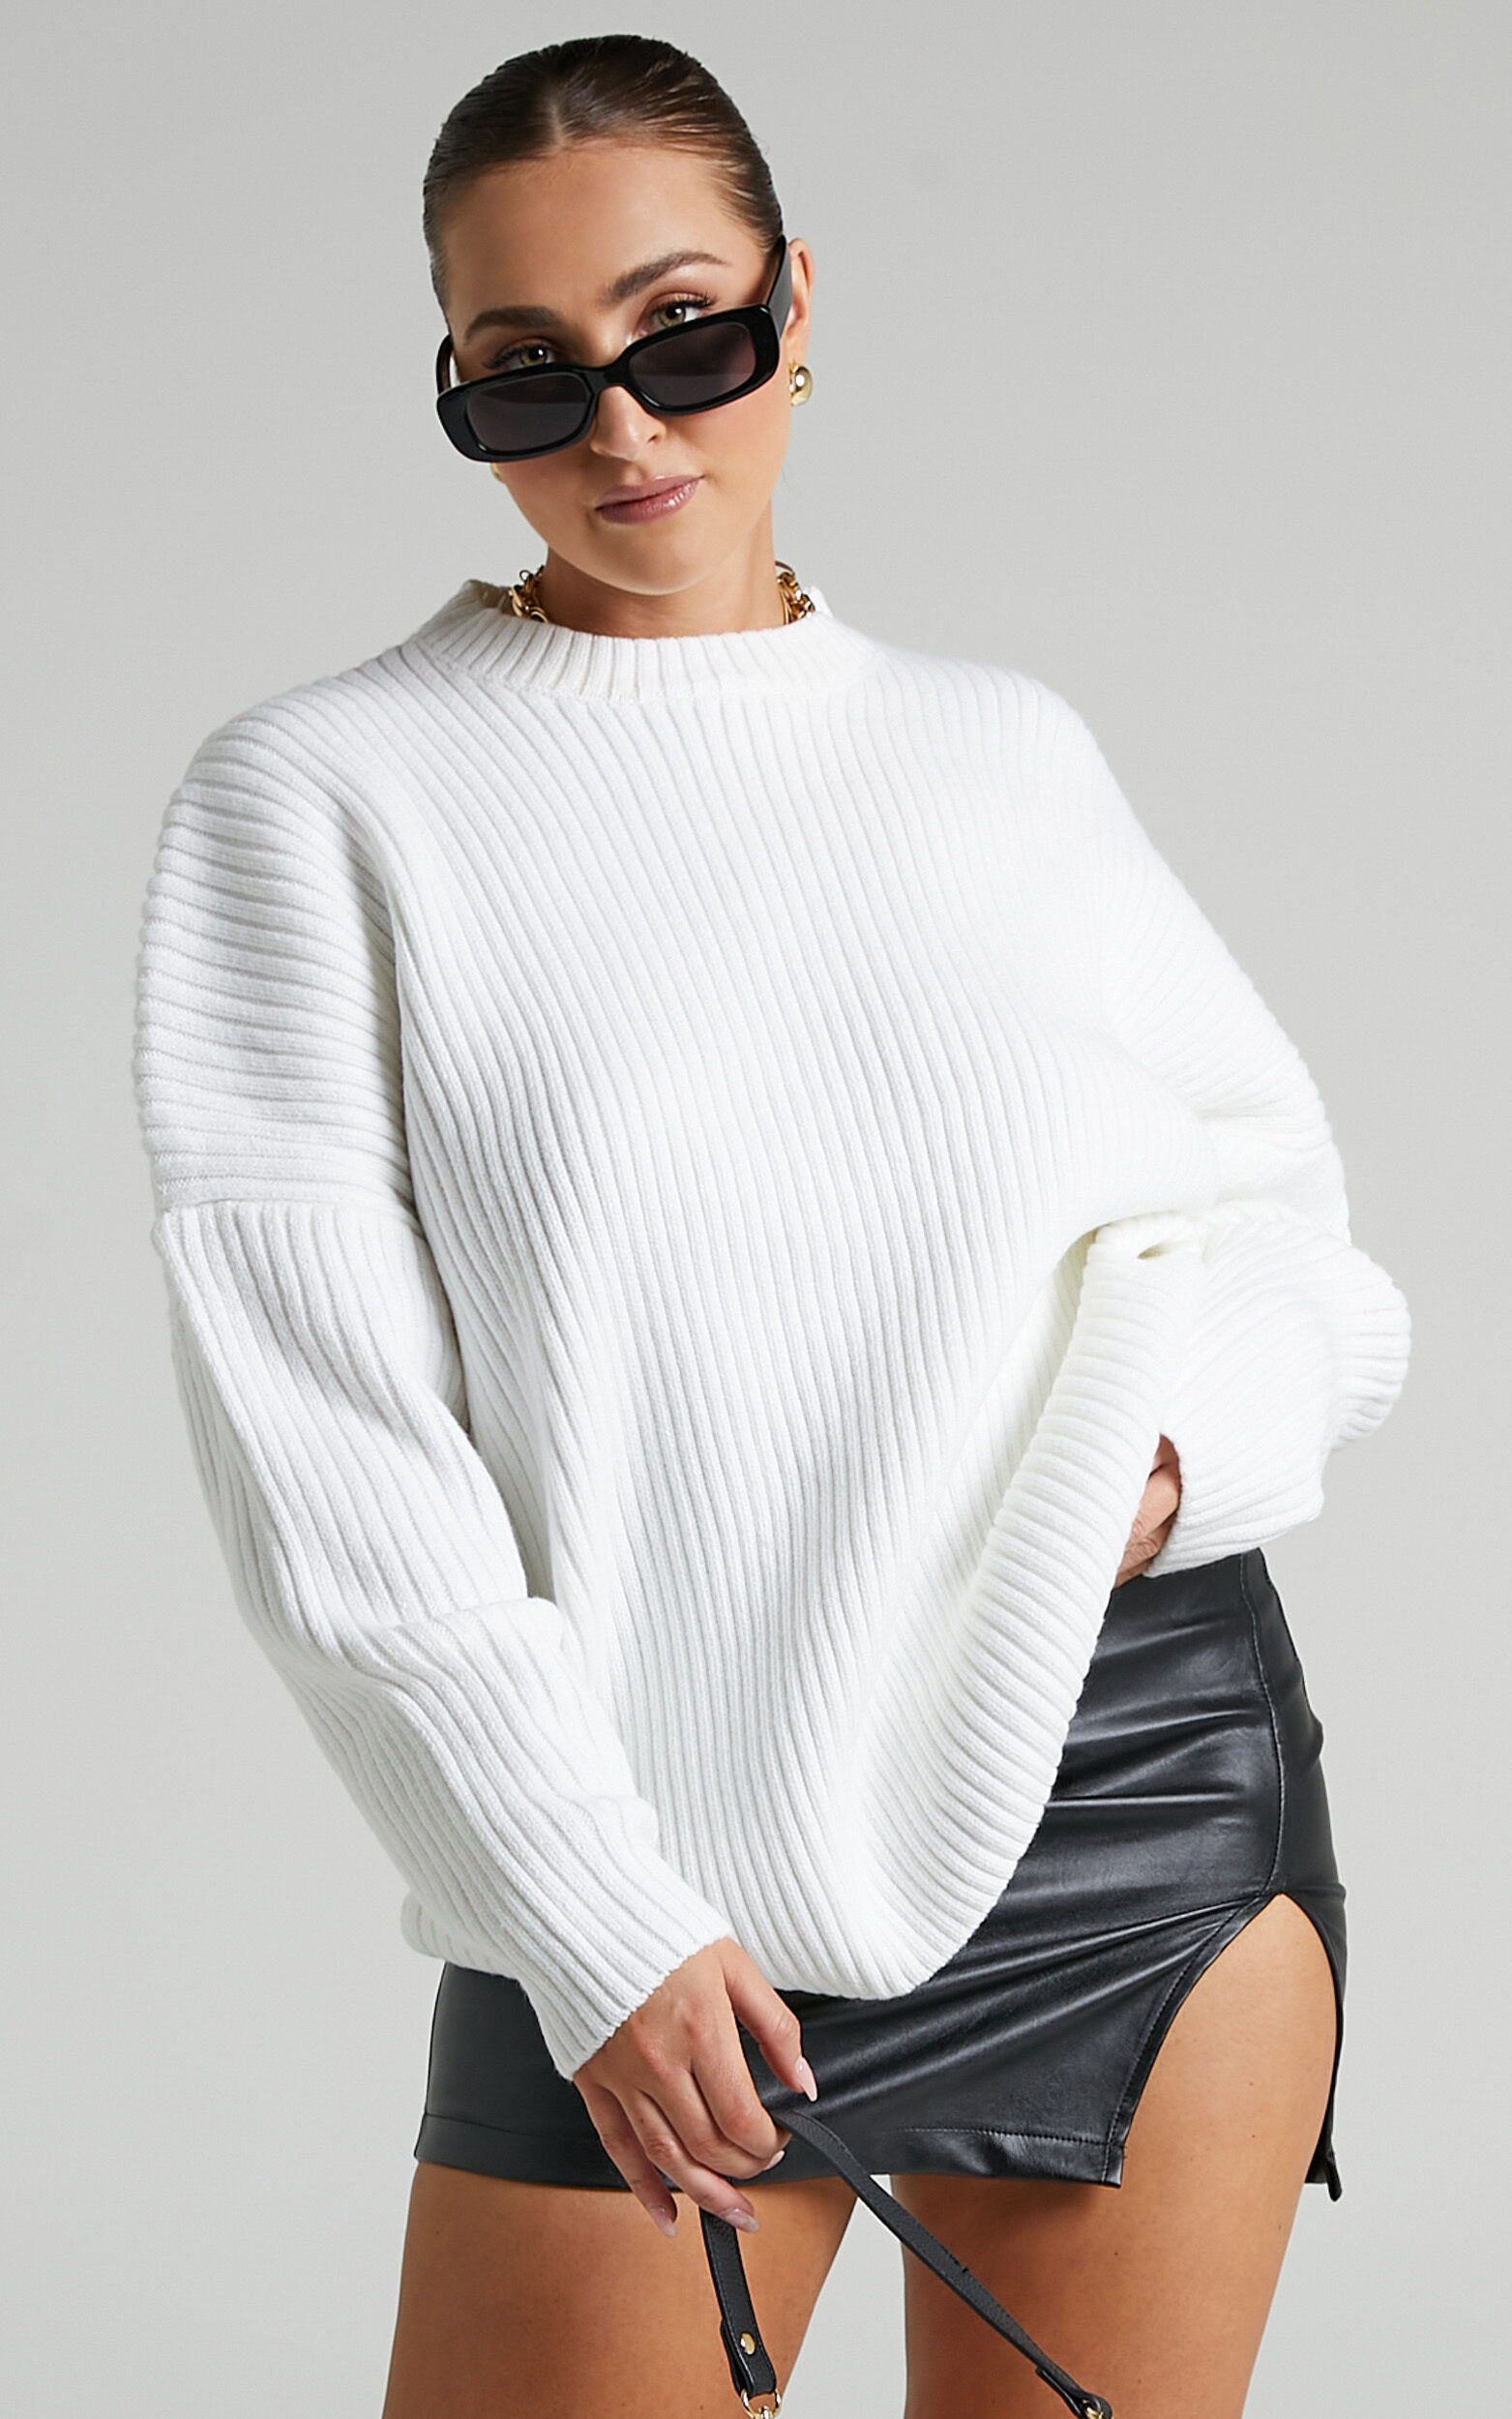 Julietta Back Cut Out Knit Jumper in White - 06, WHT1, super-hi-res image number null